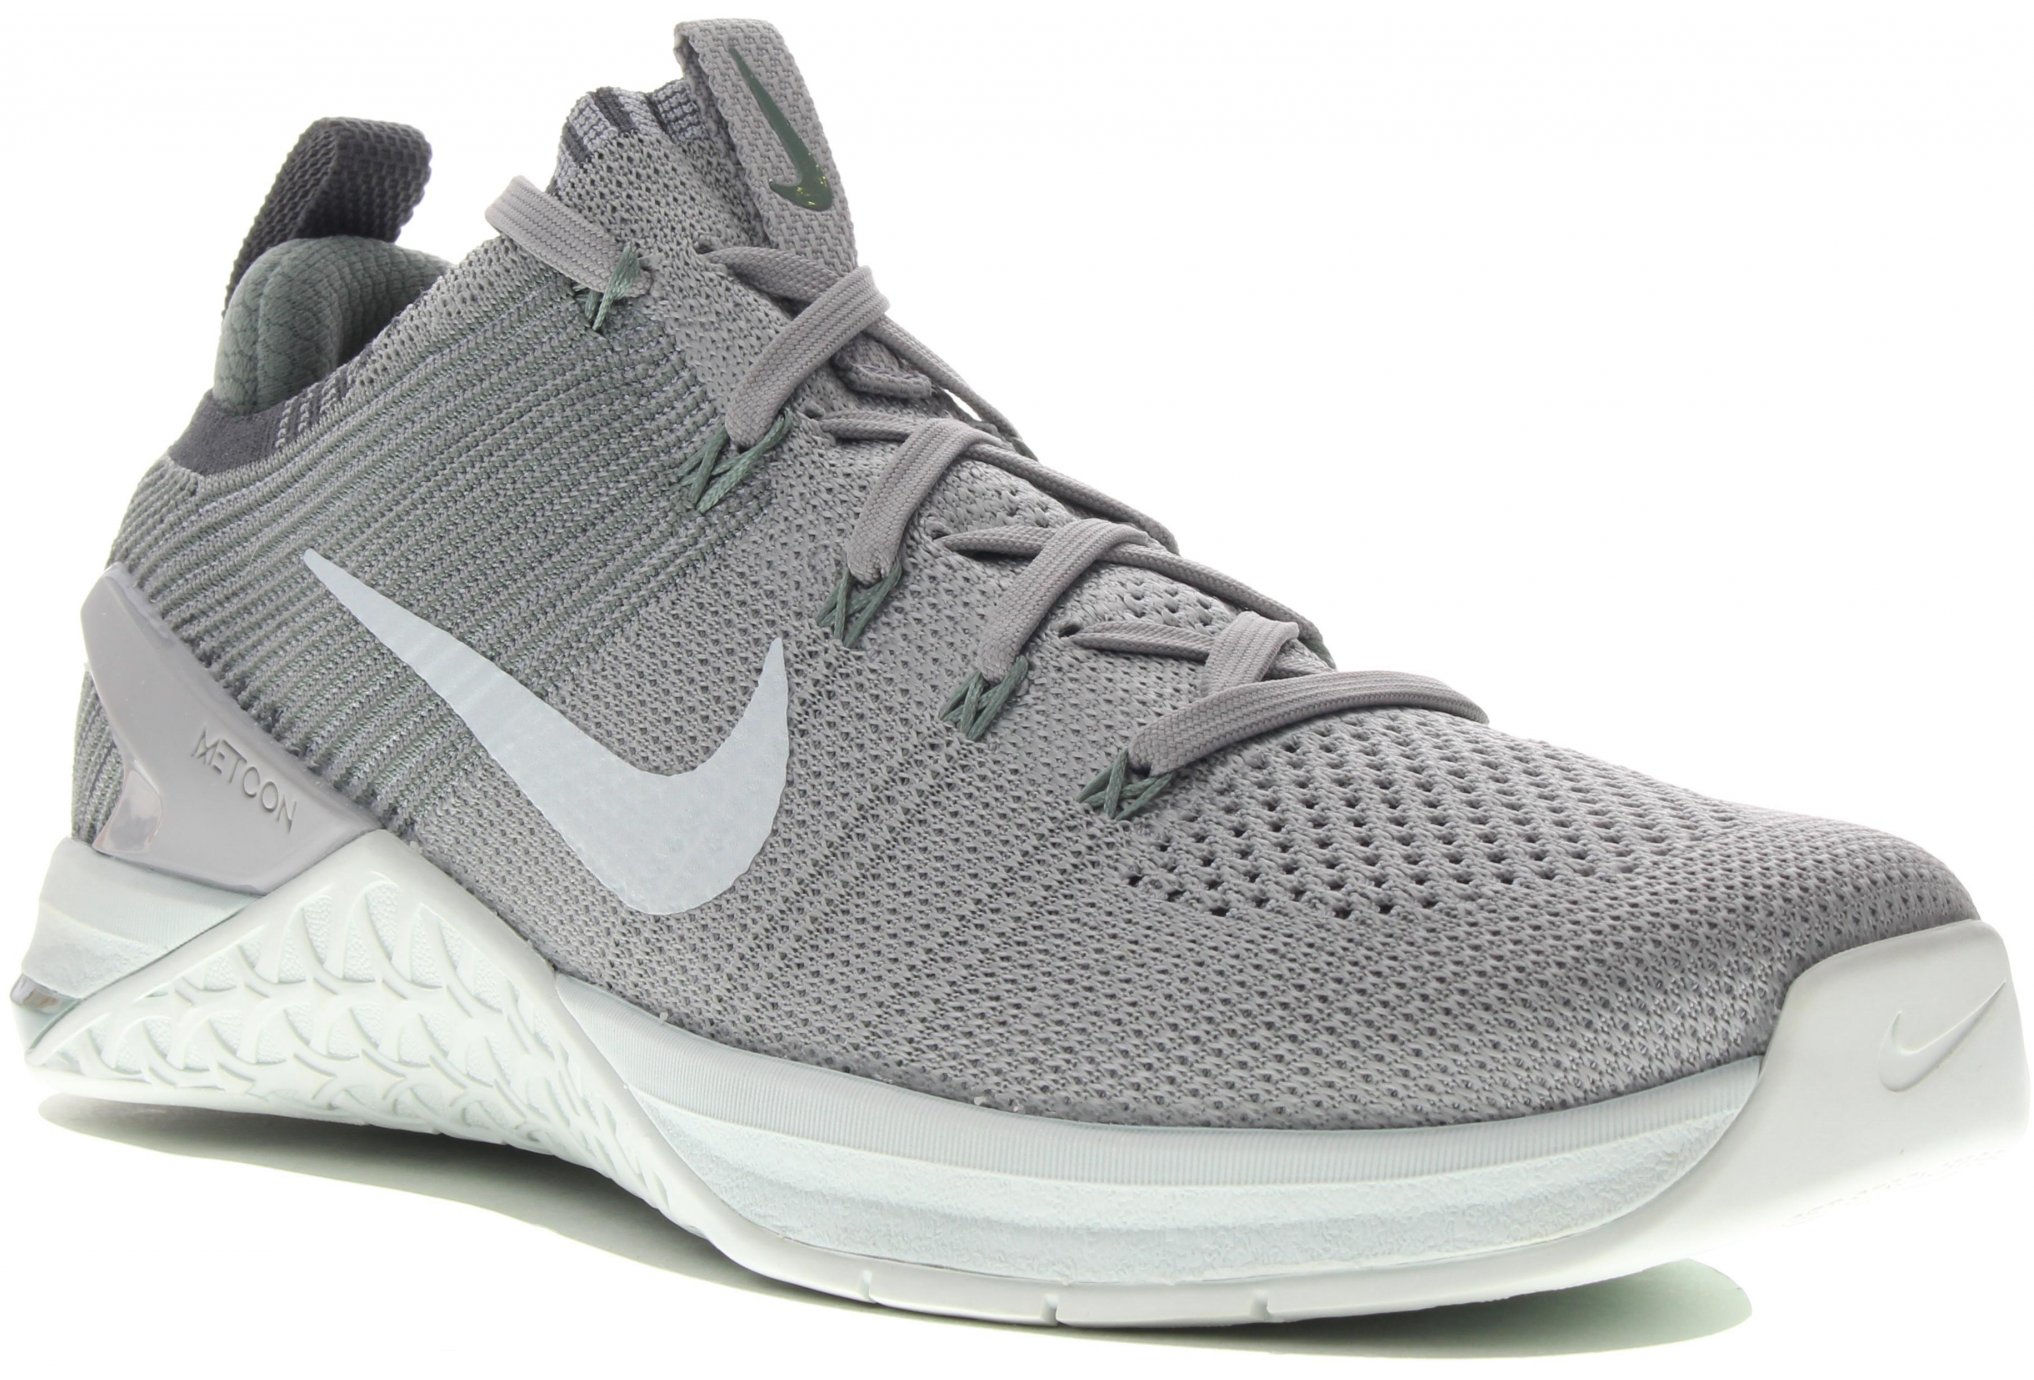 Nike Metcon dsx flyknit 2 w dittique chaussures femme